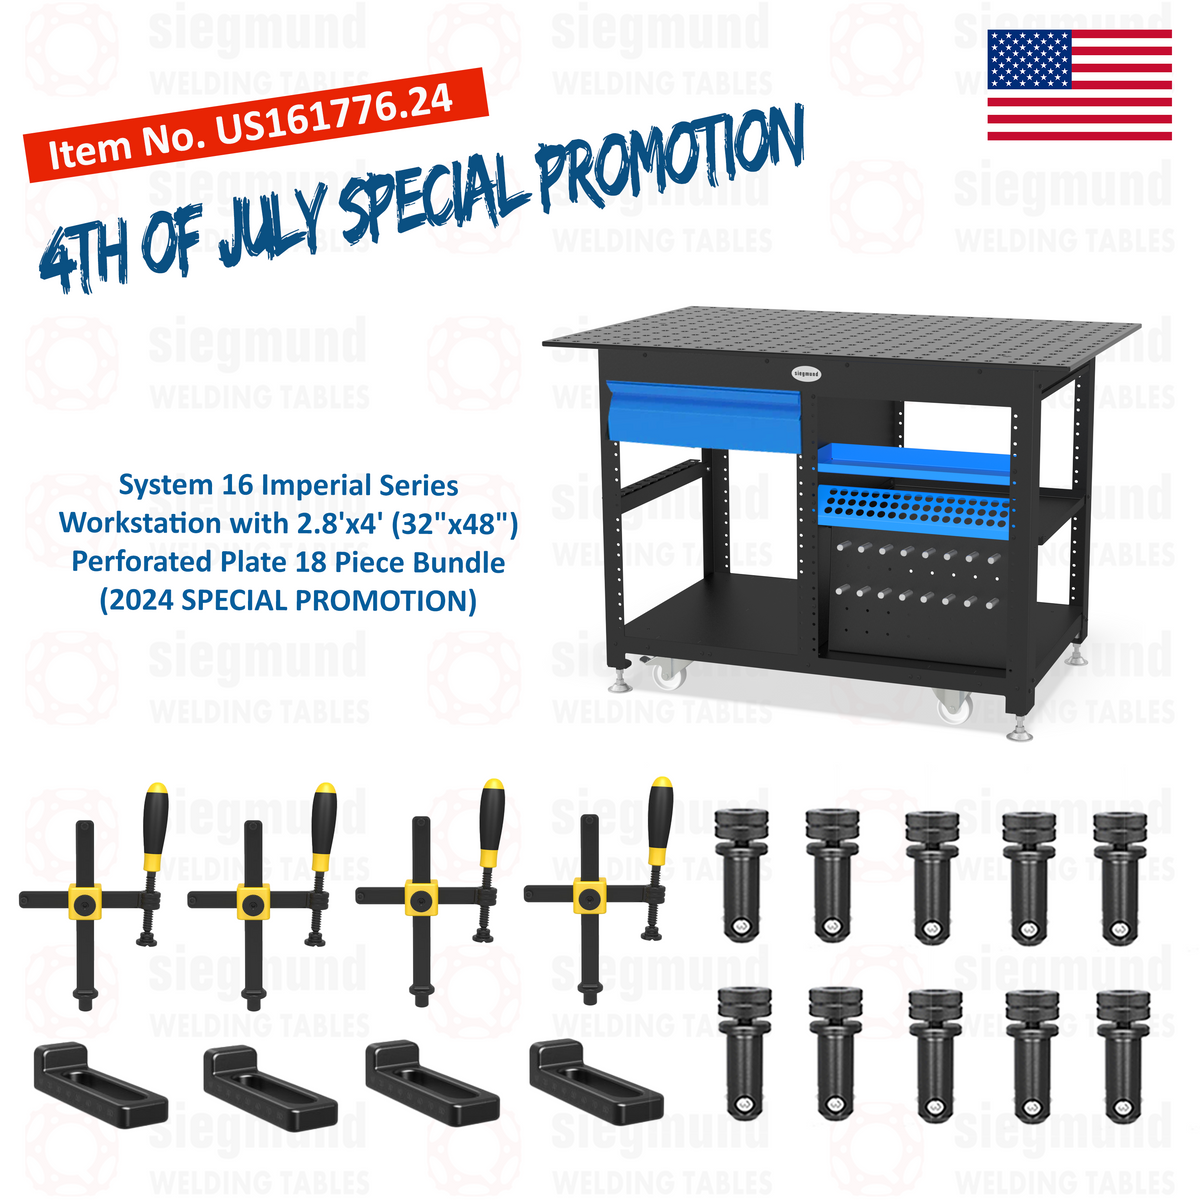 US161776: System 16 Imperial Series Workstation with 2.8'x4' (32"x48") Perforated Plate 18 Piece Bundle (JULY 4TH, 2024 SPECIAL PROMOTION)